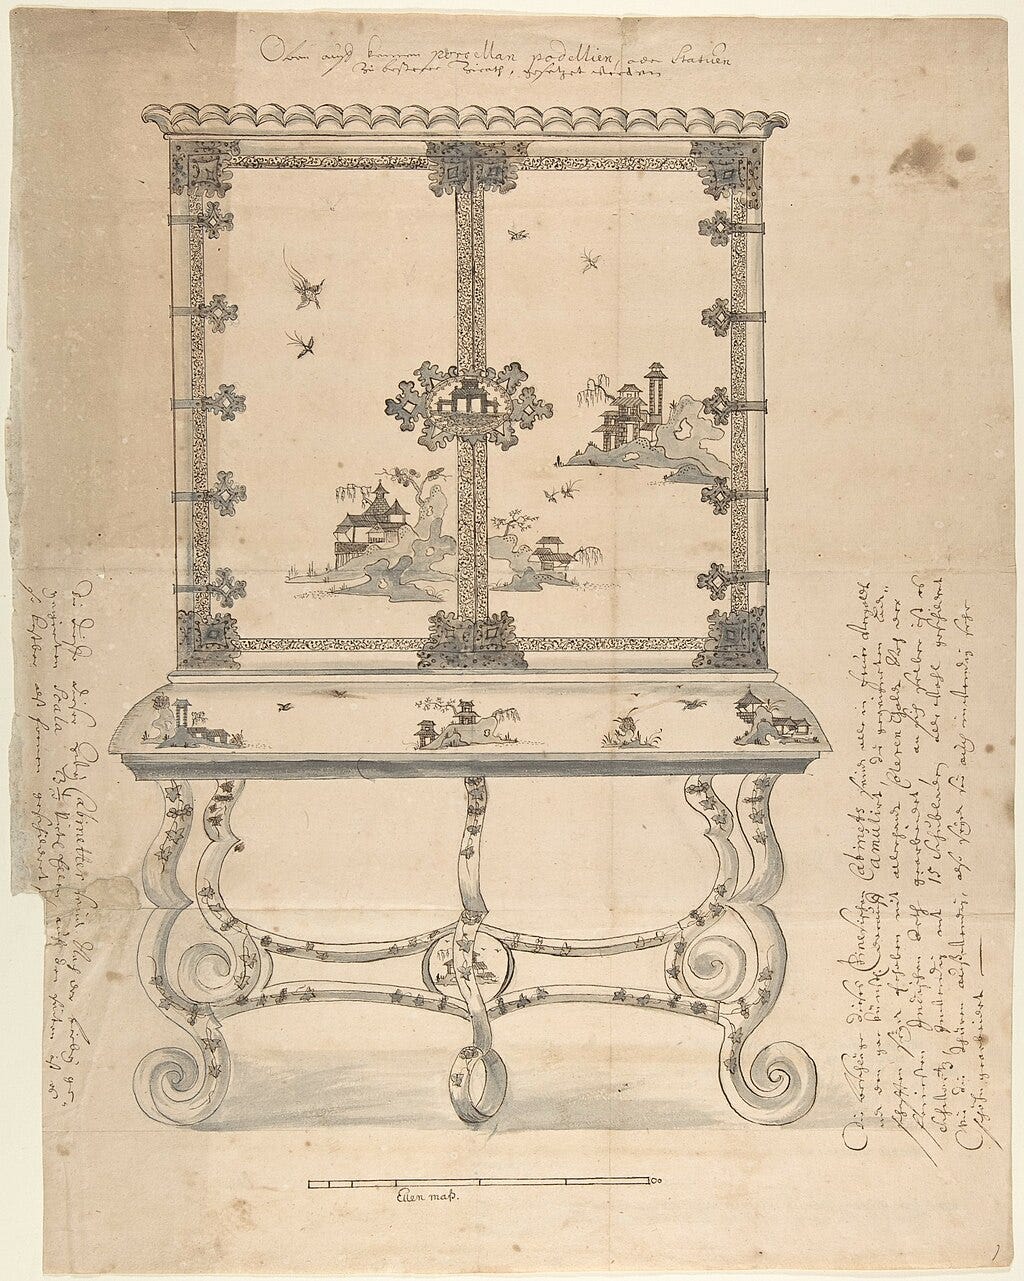 an annotated pen and ink drawing of a chinese-style lacquer cabinet raised on ornate curving feet, ca 1720-30